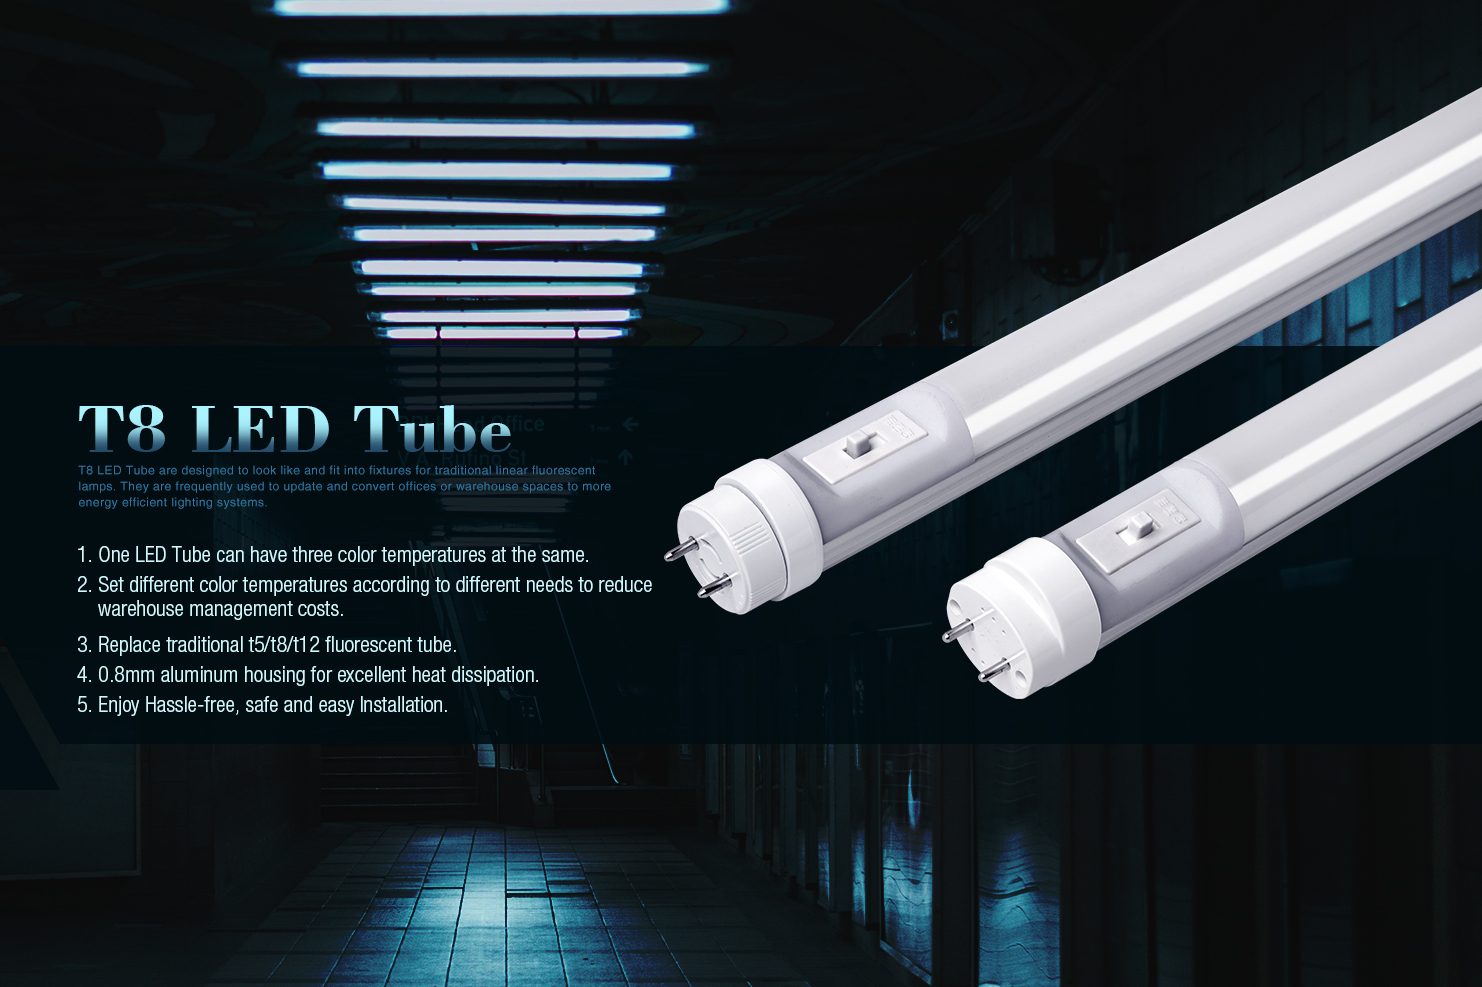 The product which can reduce your inventory pressure: Lonyung's 3CCT Adjustable T8 Led Tube have been show up